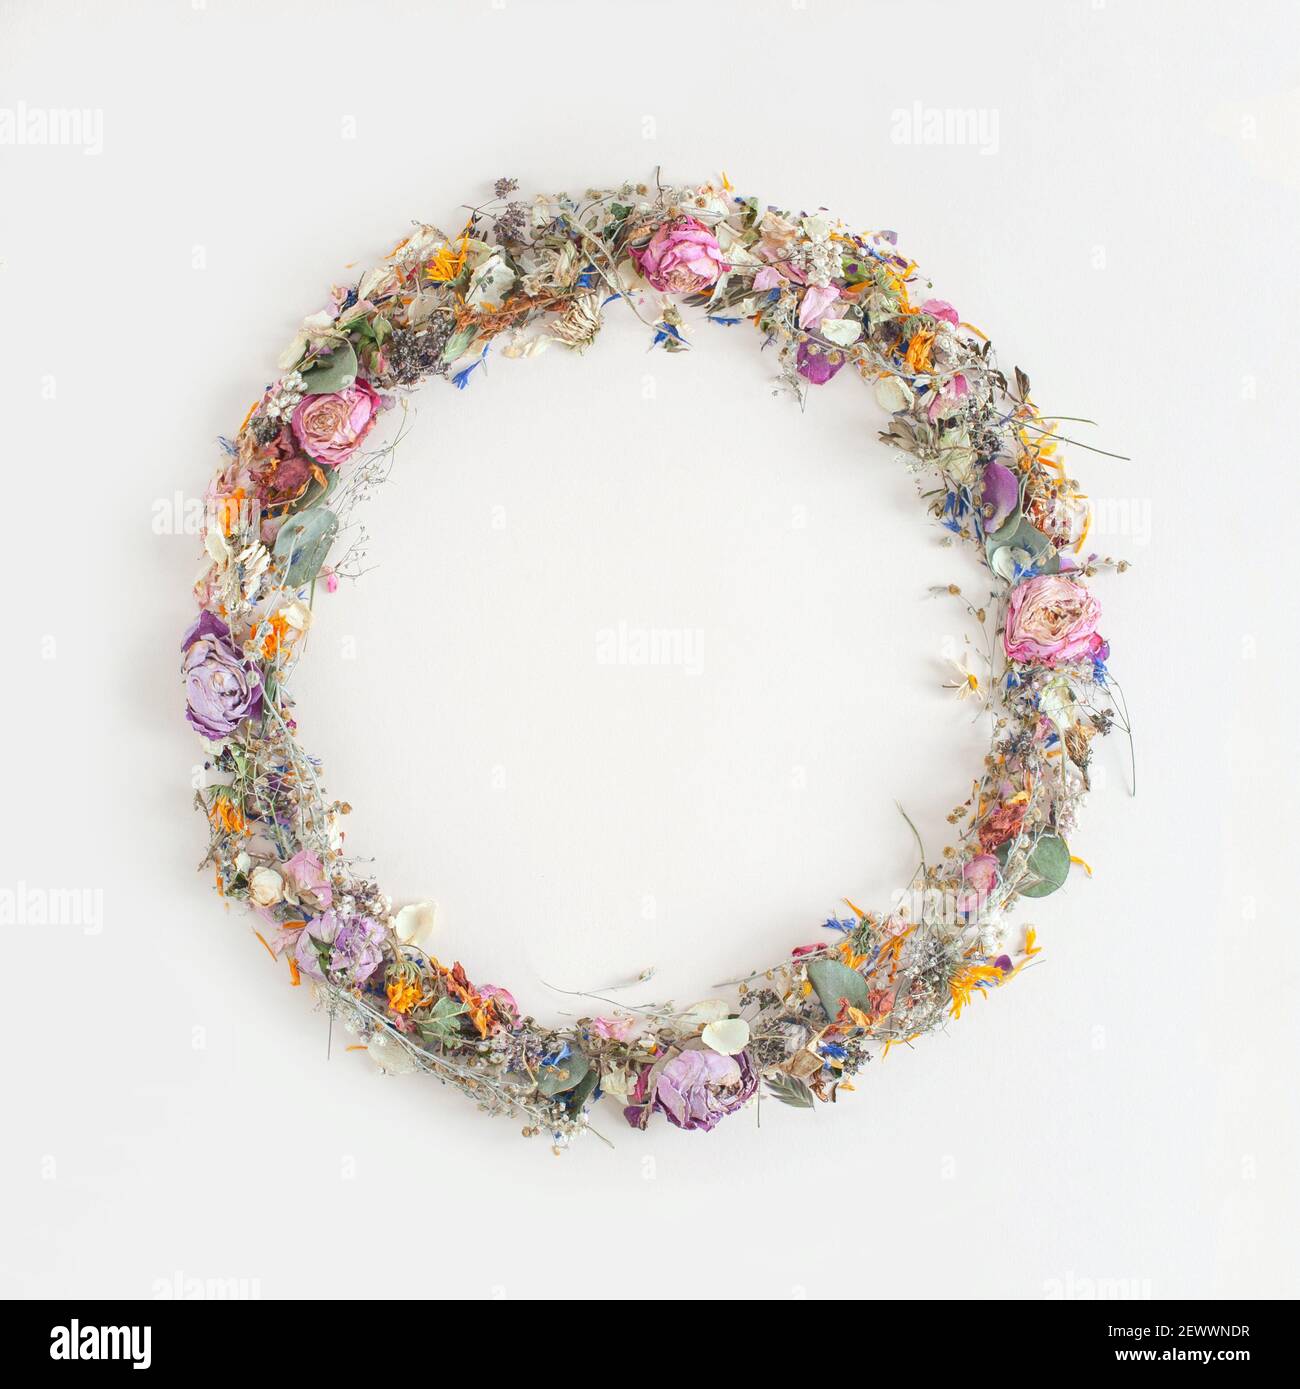 Creative round frame made with summer dried wild natural flowers and leaves over white background. Vintage nature pattern art Stock Photo